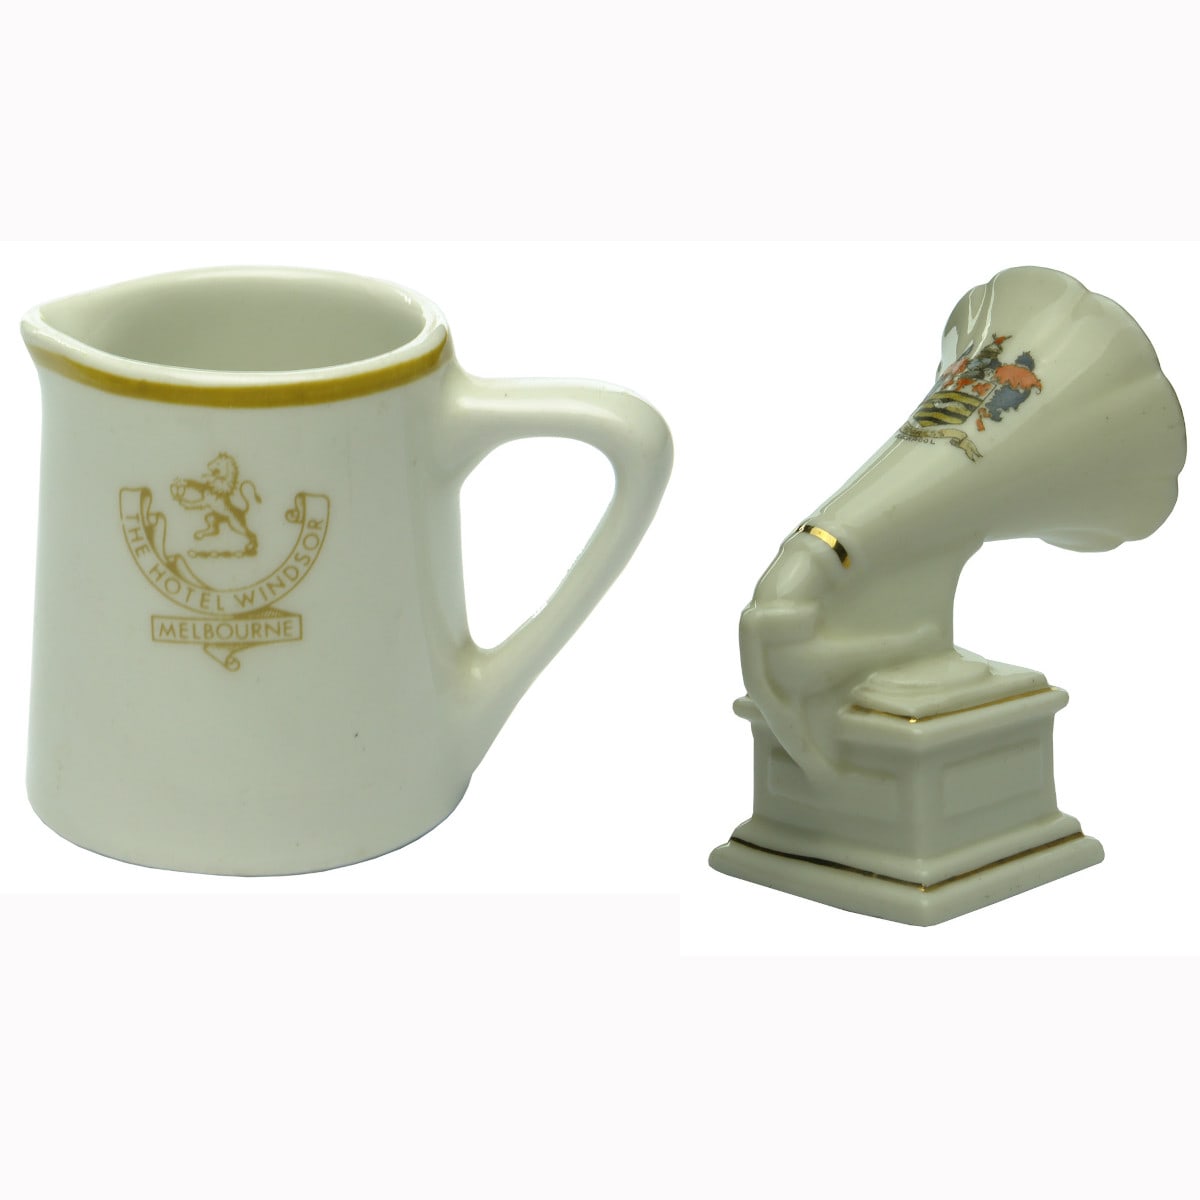 Two pieces of Souvenir/Hotel ware: Hotel Windsor, Melbourne & Blackpool, England.